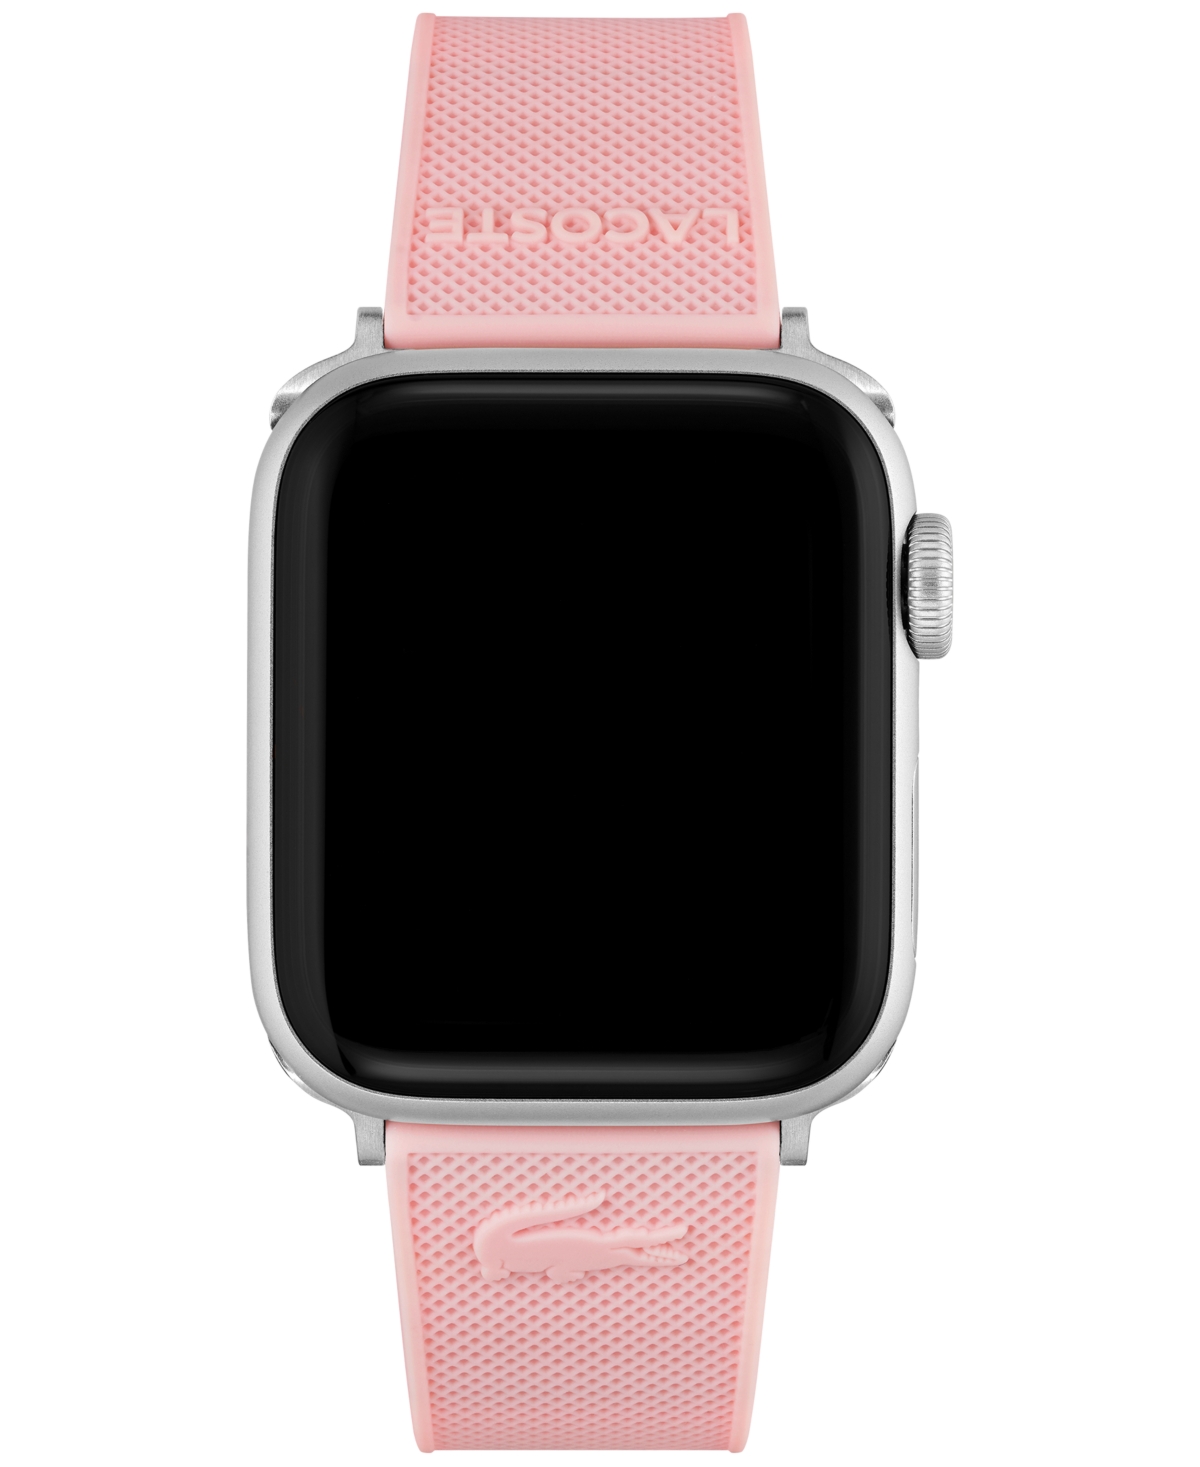 Petit Pique Pink Silicone Strap for Apple Watch 38mm/40mm - Pink